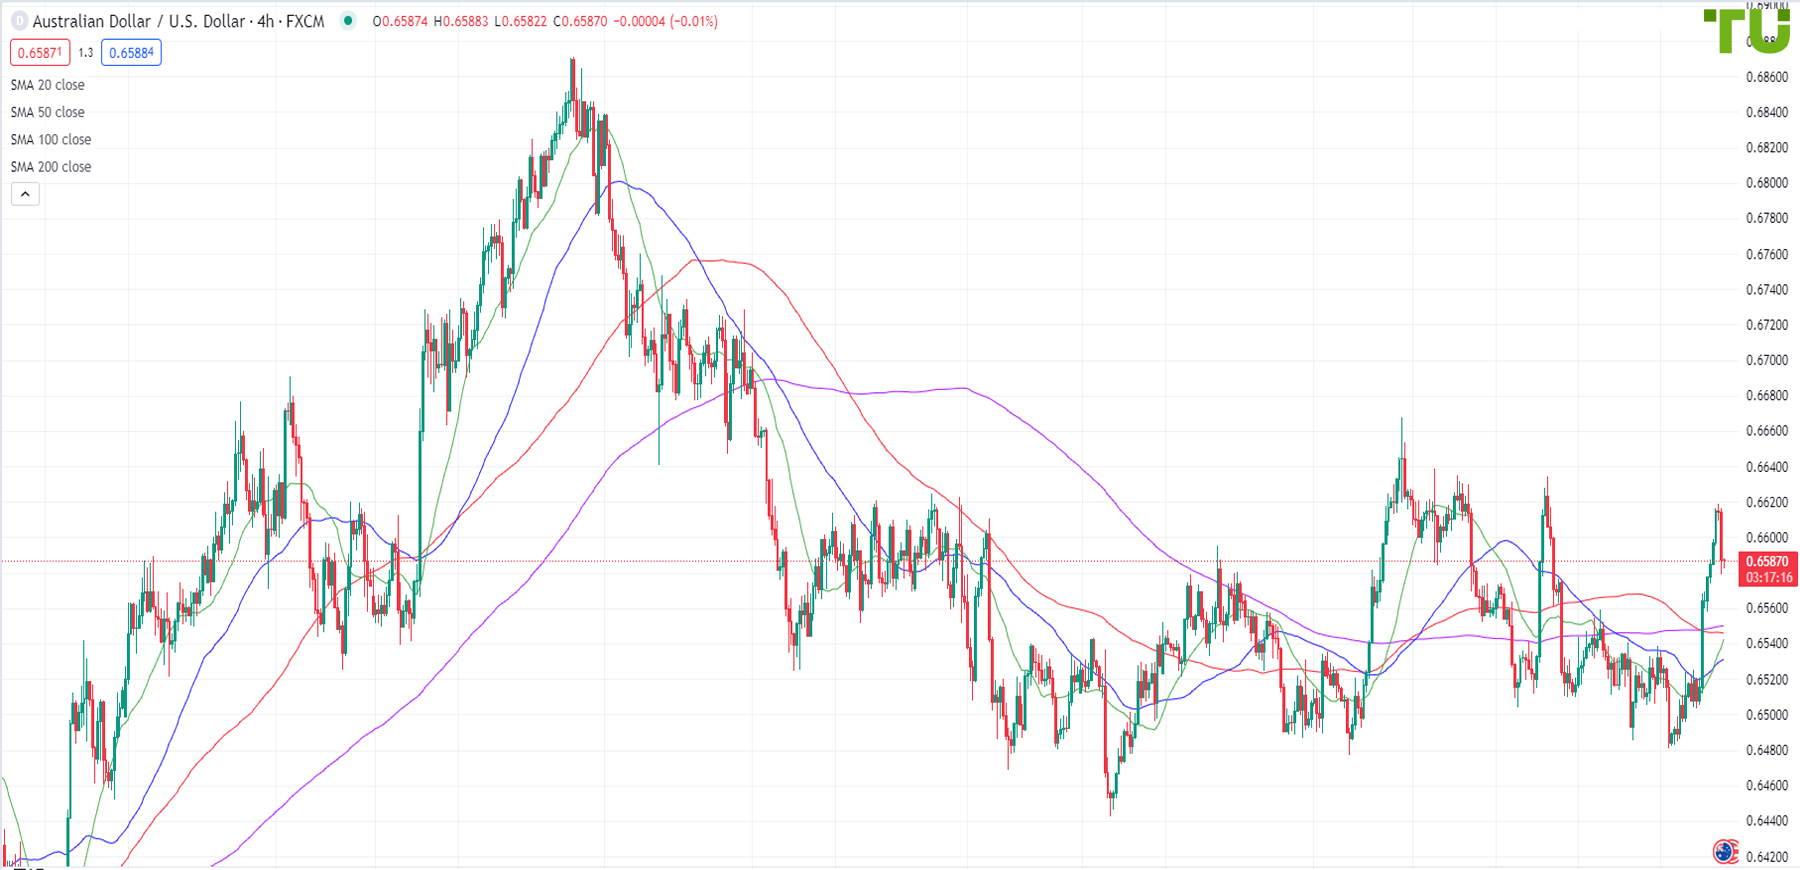 Aussie/dollar moved higher but sold off from resistance at 0.6615